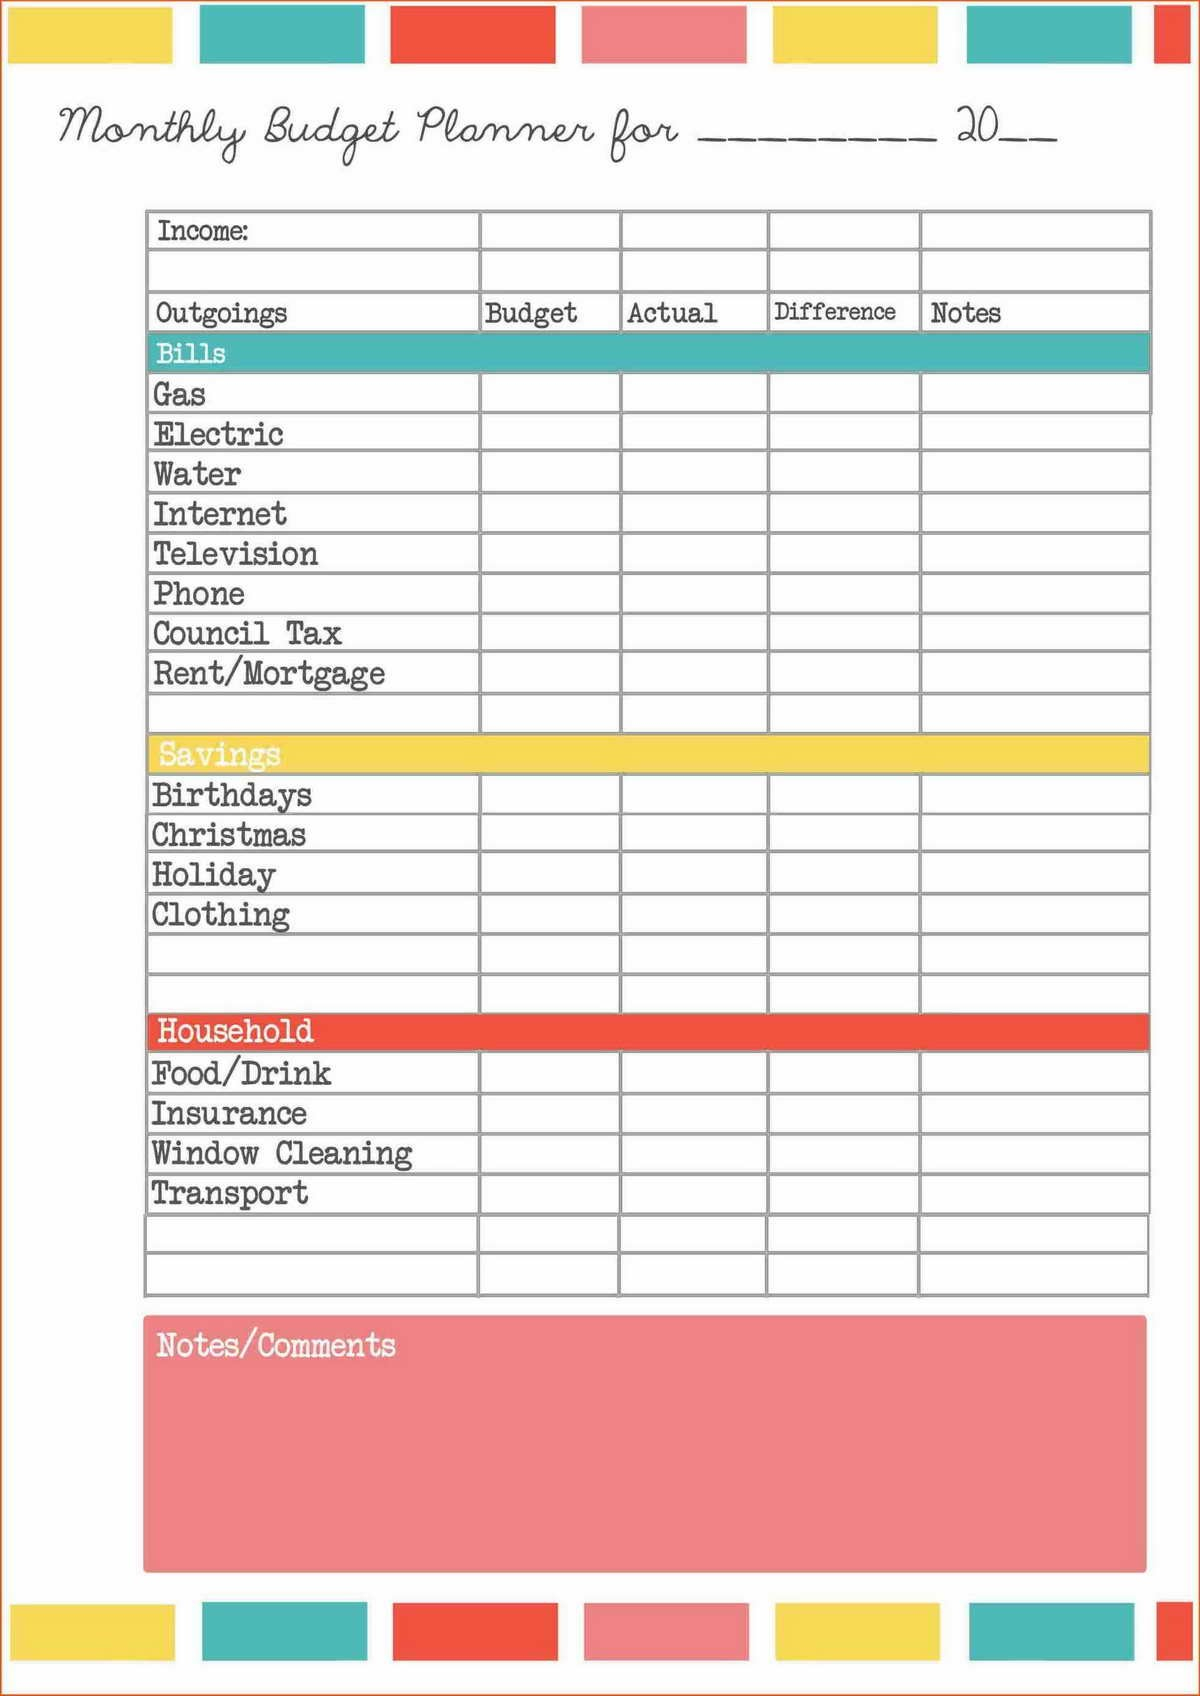 Tax Worksheet For Business Expenses Save Accounting Spreadsheet with Small Business Expense Tracking Template